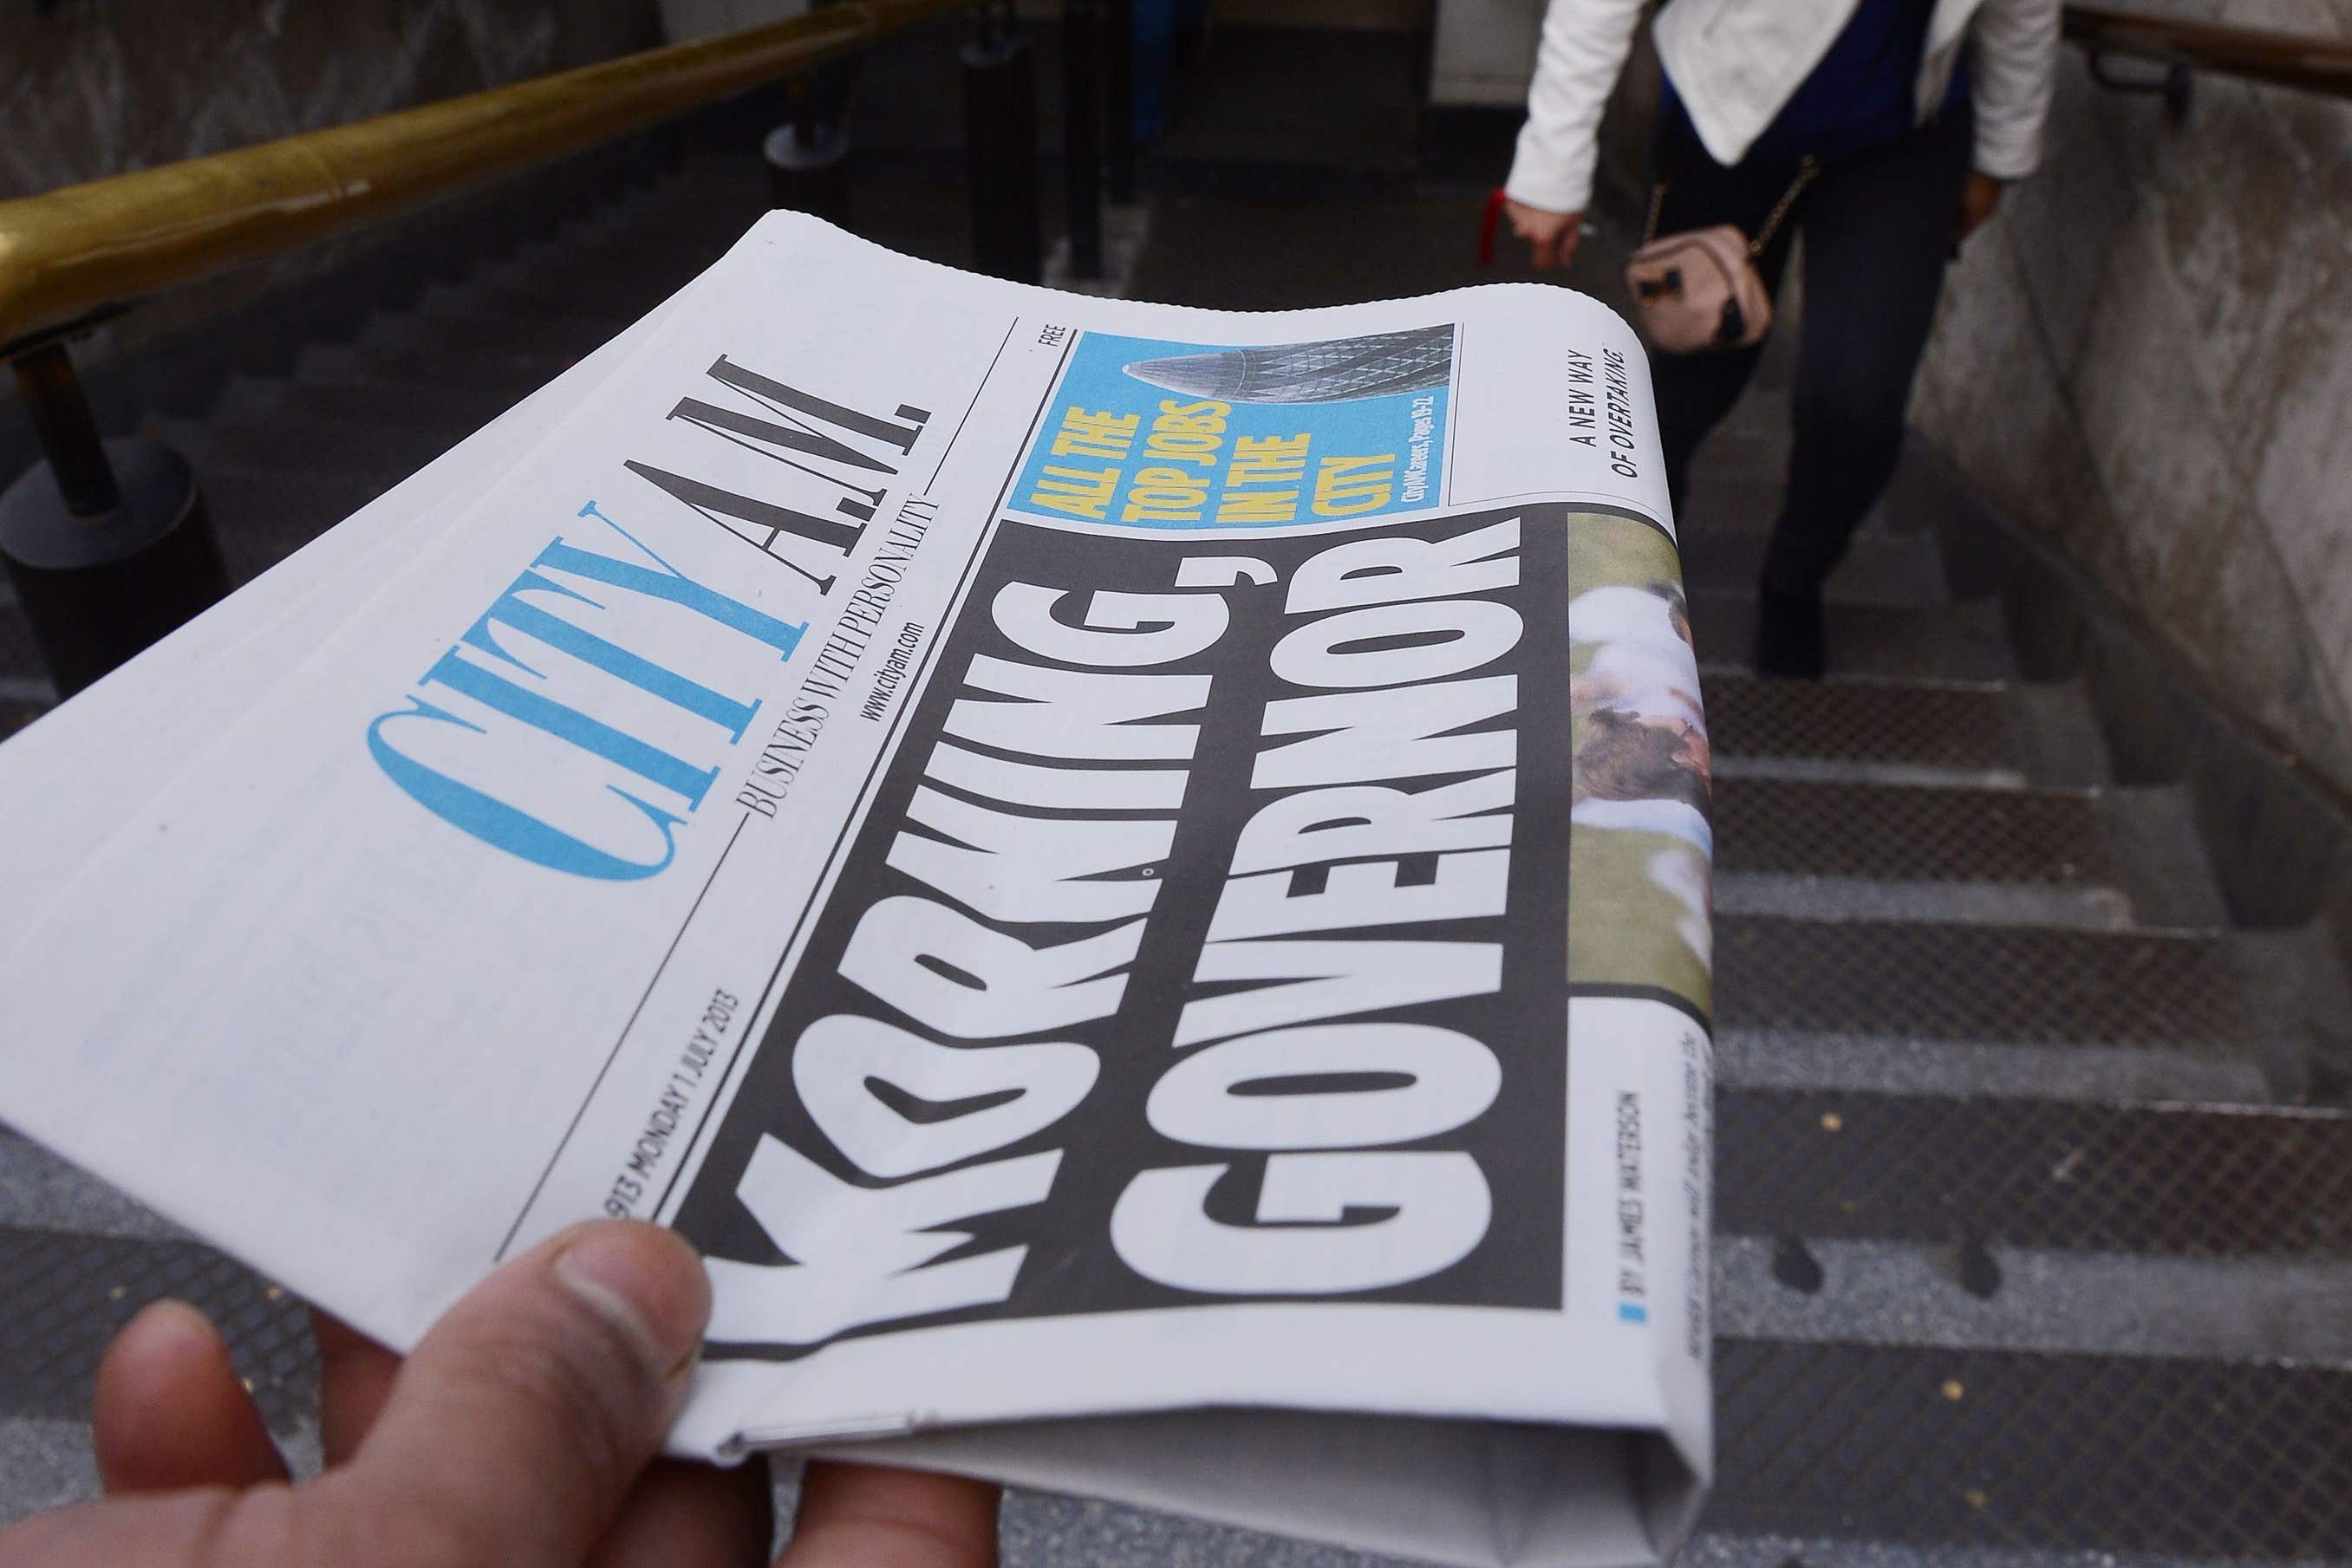 City AM is handed out at Bank Station in London (Stefan Rousseau/PA)